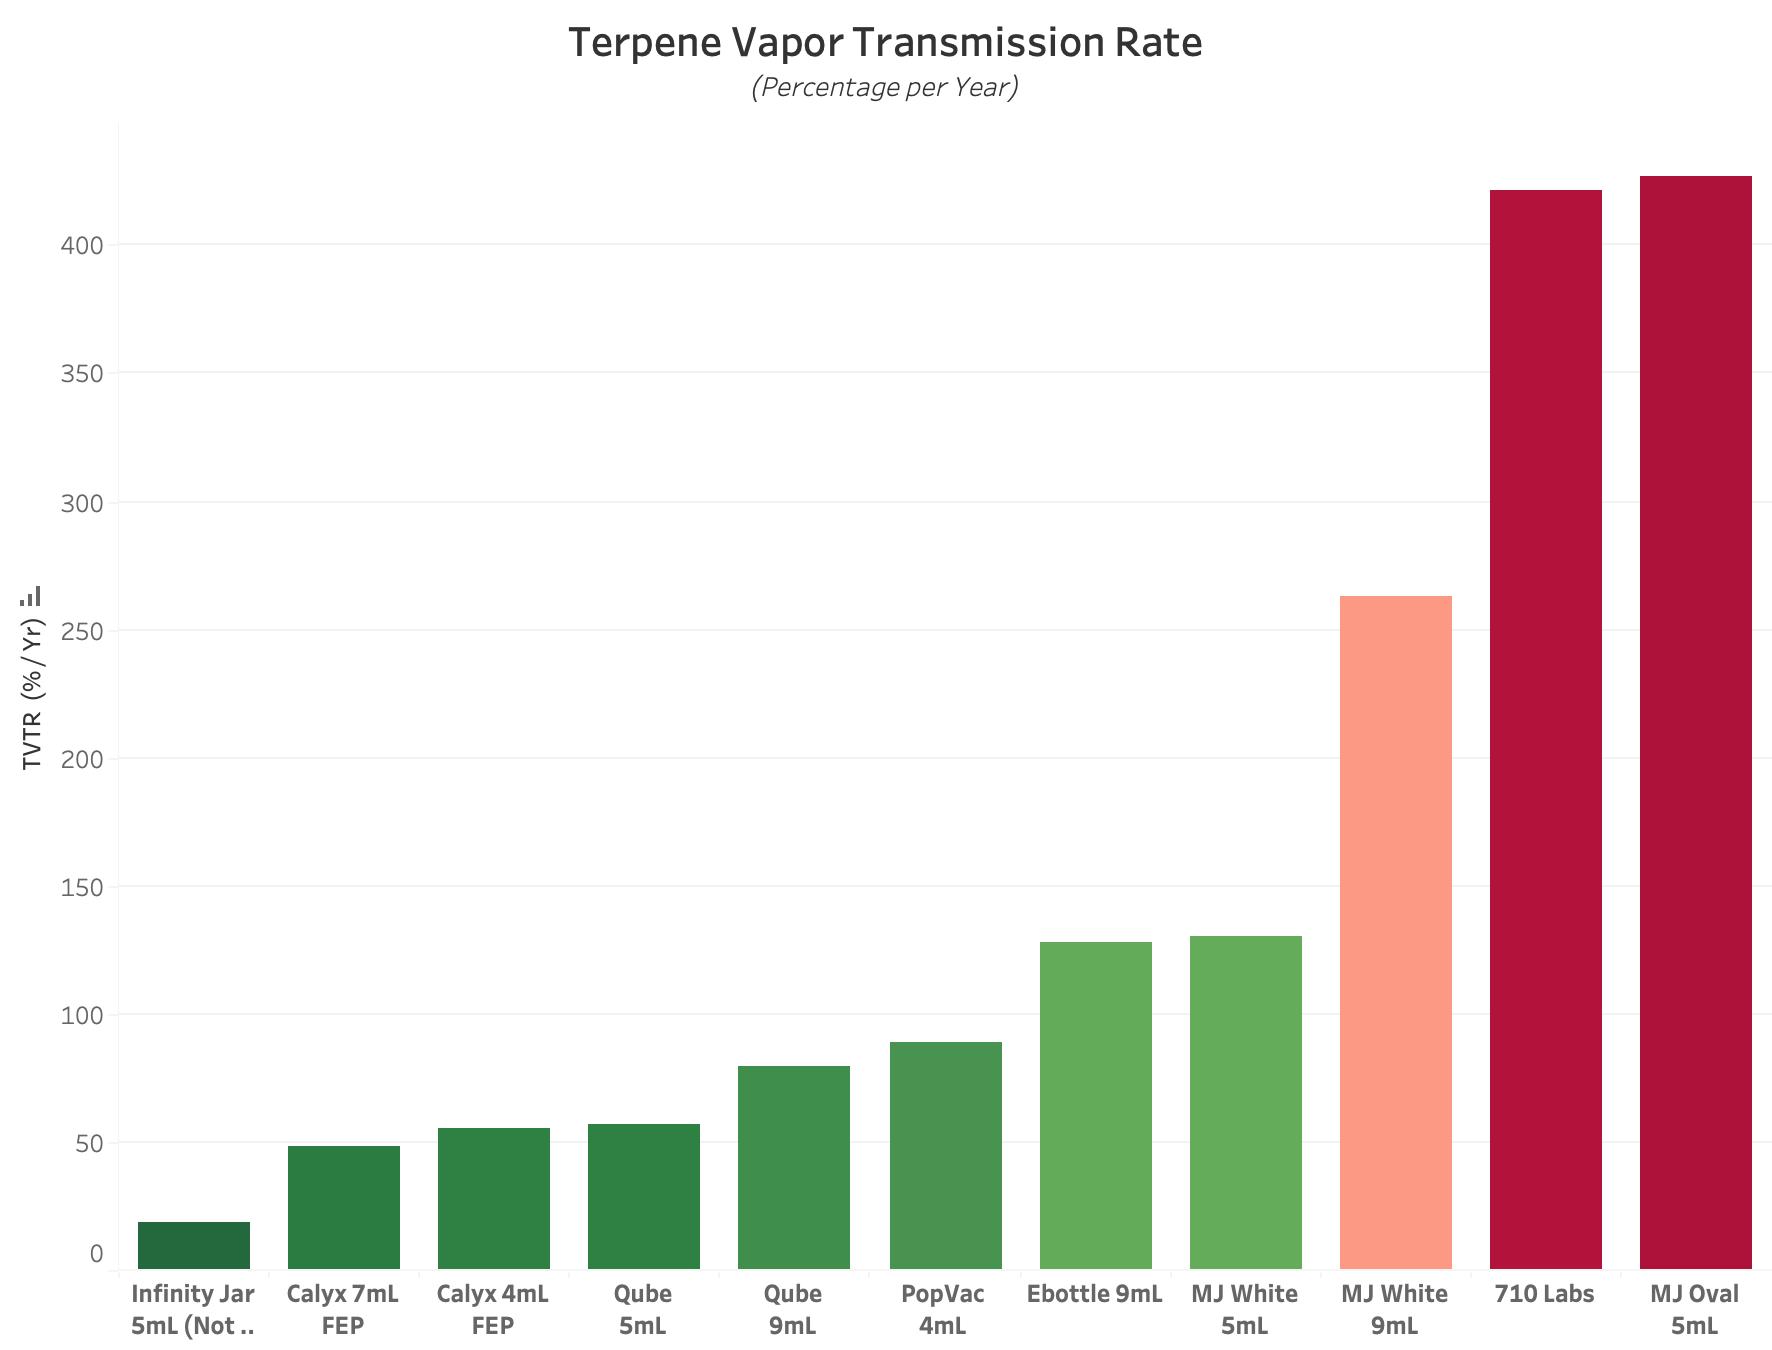 Chart showing the Terpene Vapor Transmission Rate for Calyx concentrate containers vs competitors